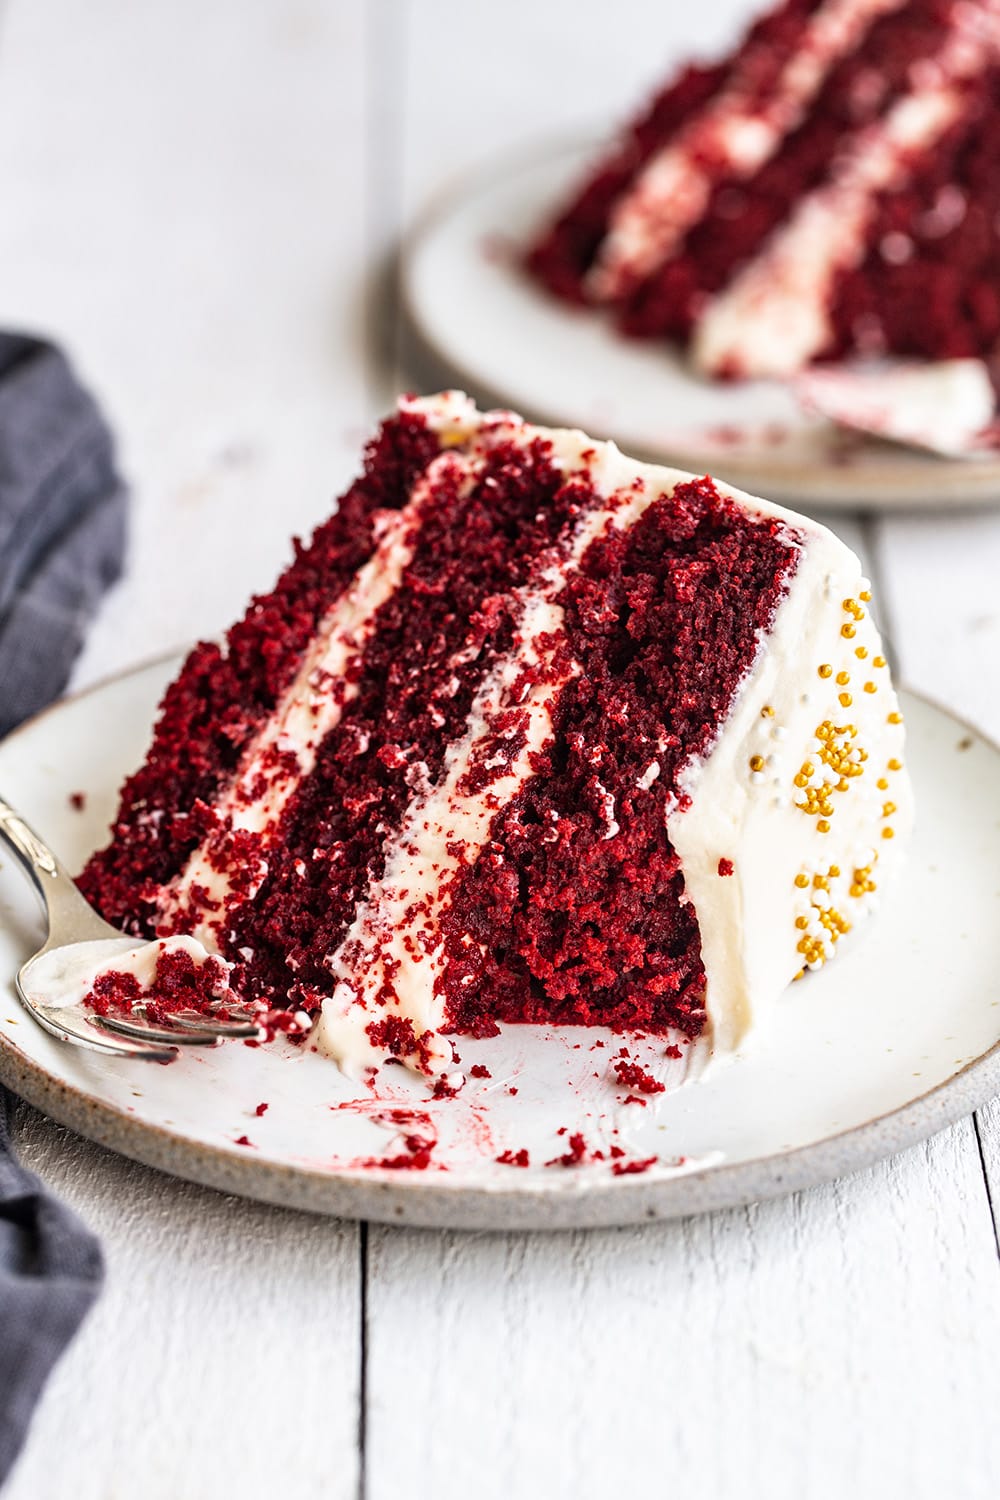 A slice of Red Velvet Cake with cream cheese frosting